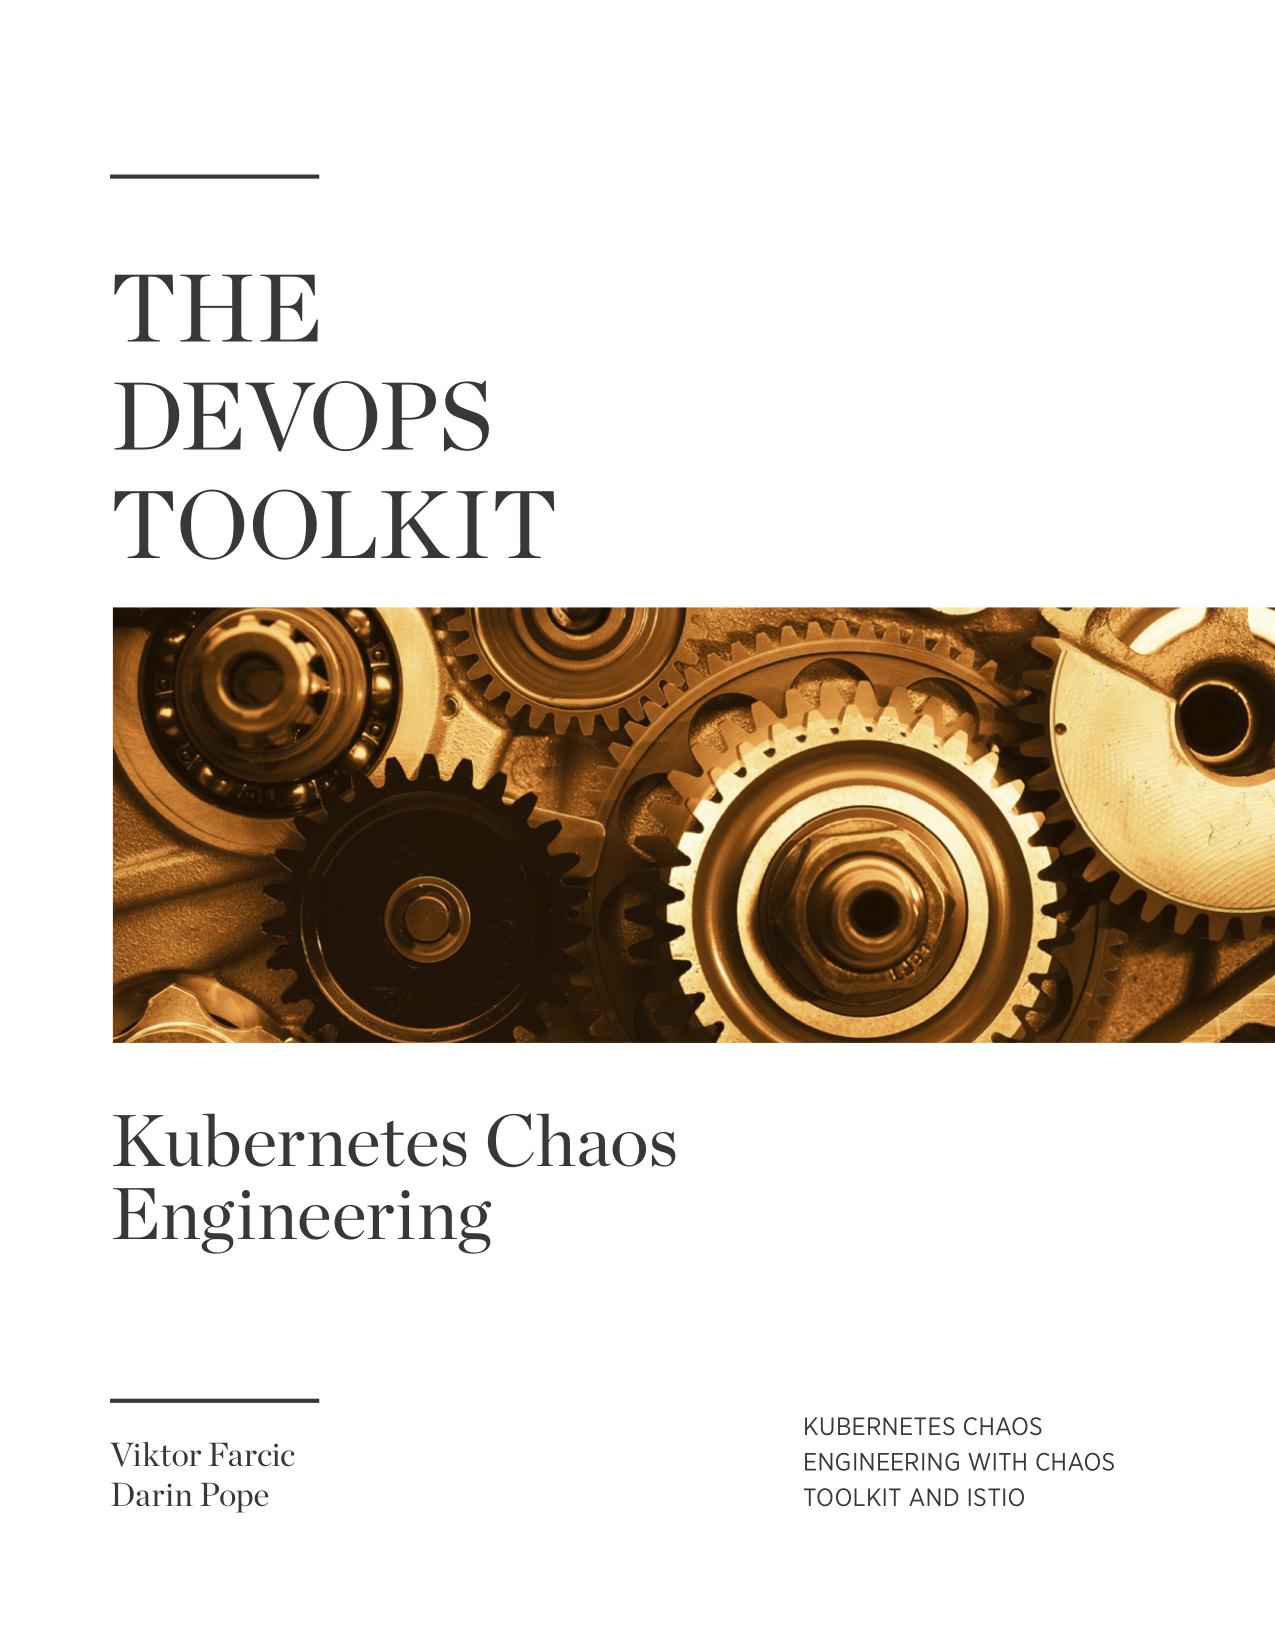 The DevOps Toolkit: Kubernetes Chaos Engineering: Kubernetes Chaos Engineering with Chaos Toolkit and Istio